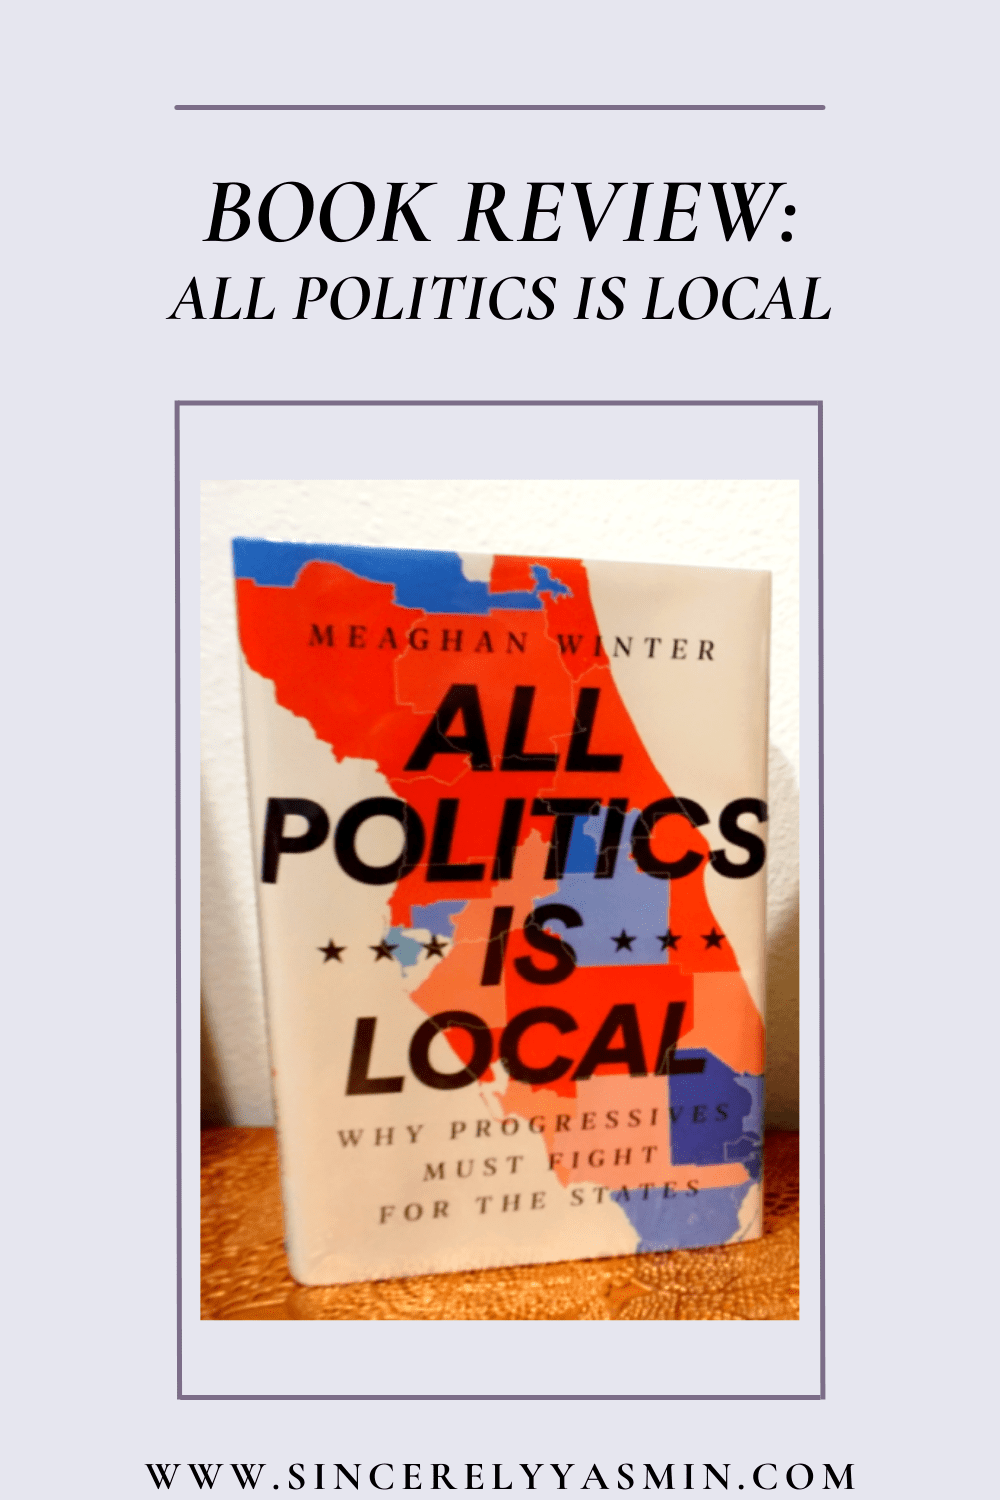 All Politics is Local by Meaghan Winters - Book Review